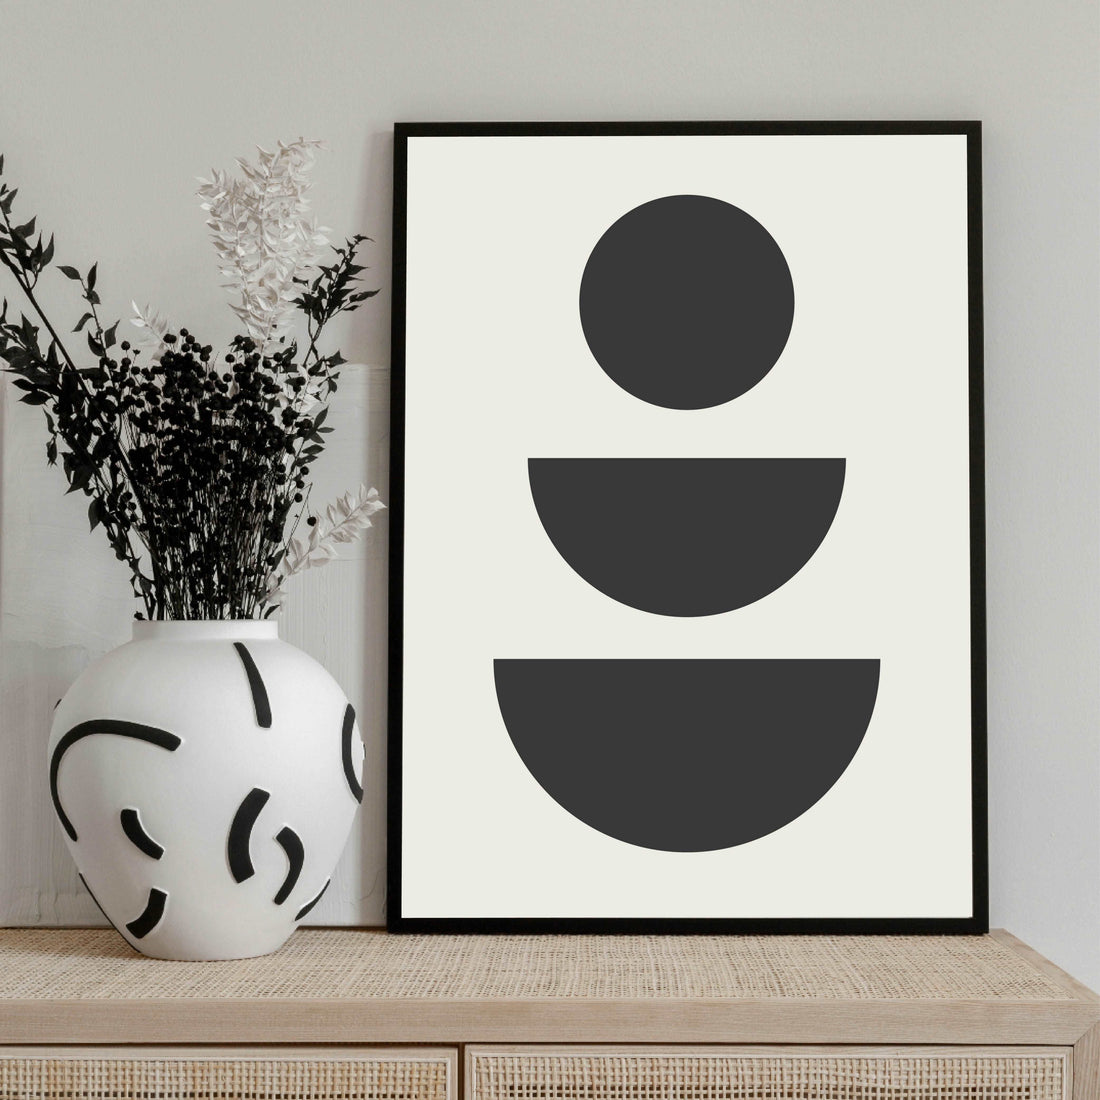 Poster Balanced Triad - Add sophistication to your home